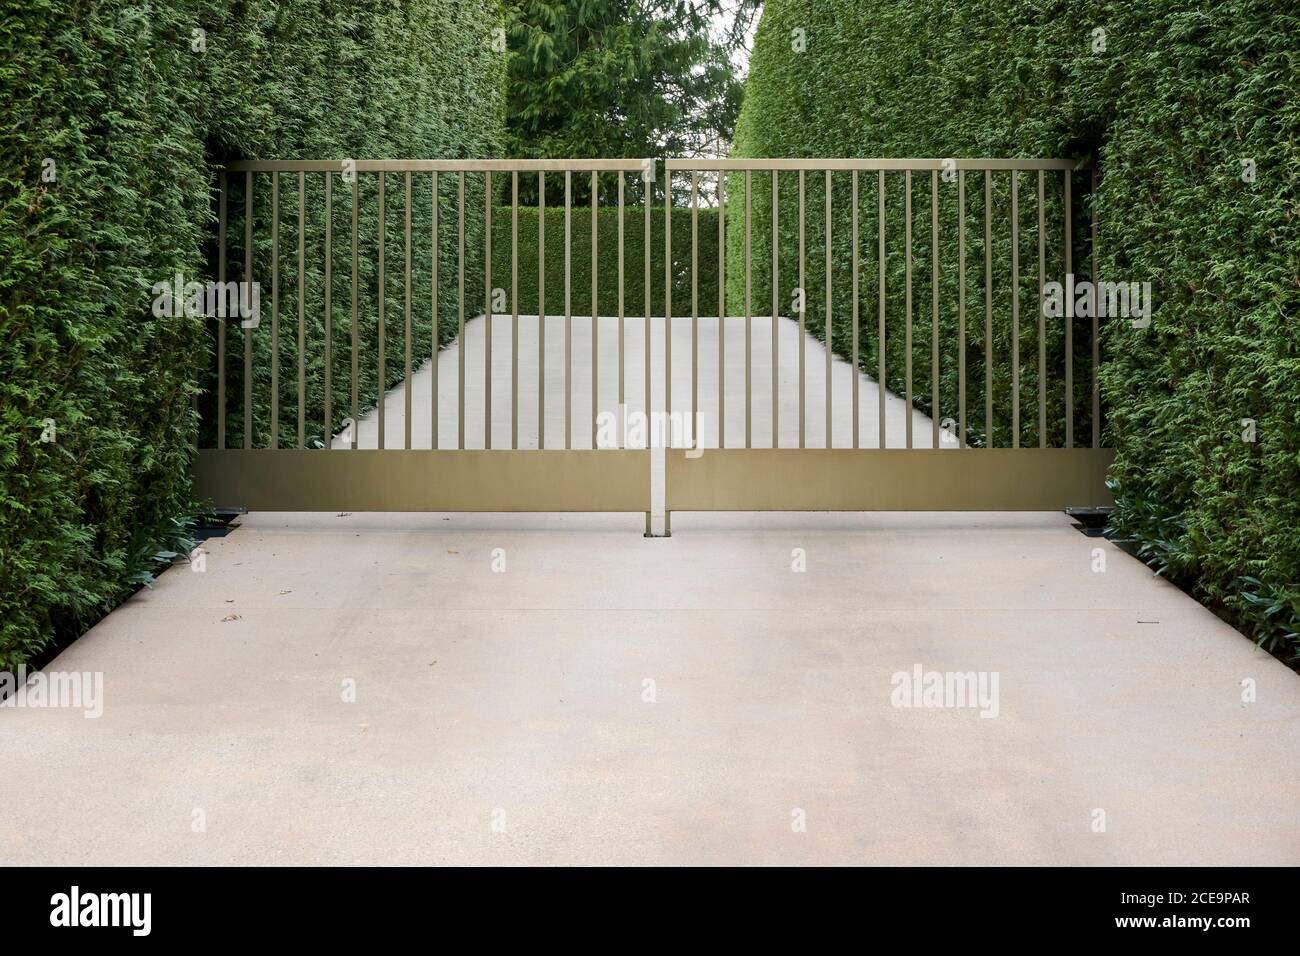 Concrete driveway with locked metal gate in a residential neighbourhood Stock Photo